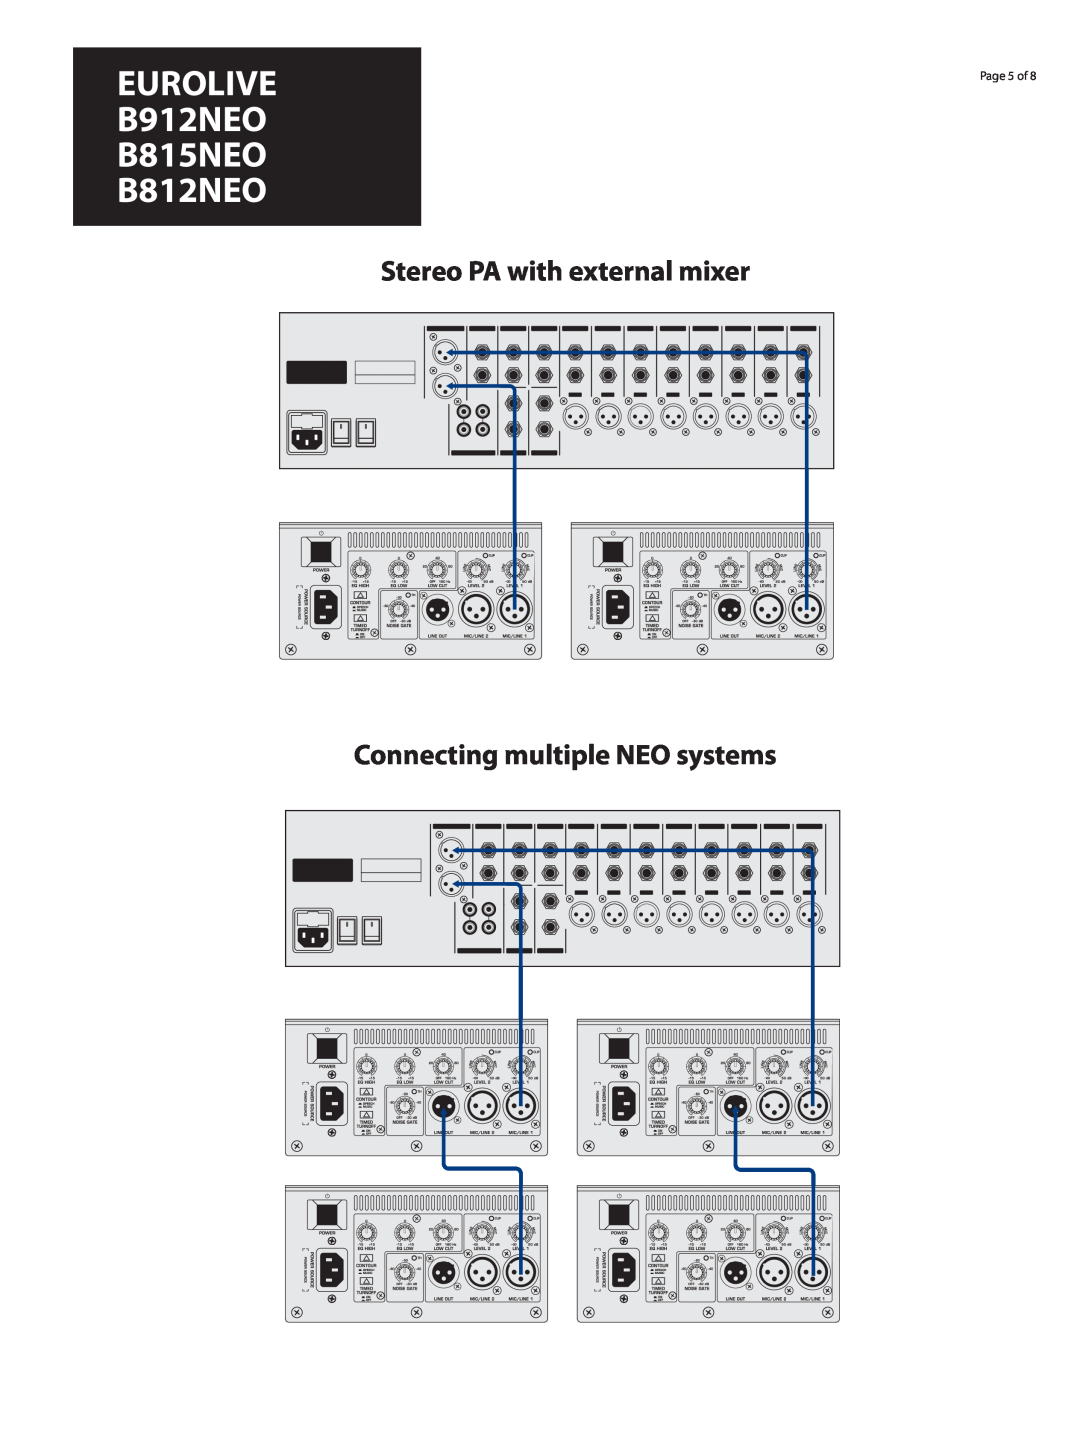 Behringer Stereo PA with external mixer, Connecting multiple NEO systems, EUROLIVE B912NEO B815NEO B812NEO, Page 5 of 